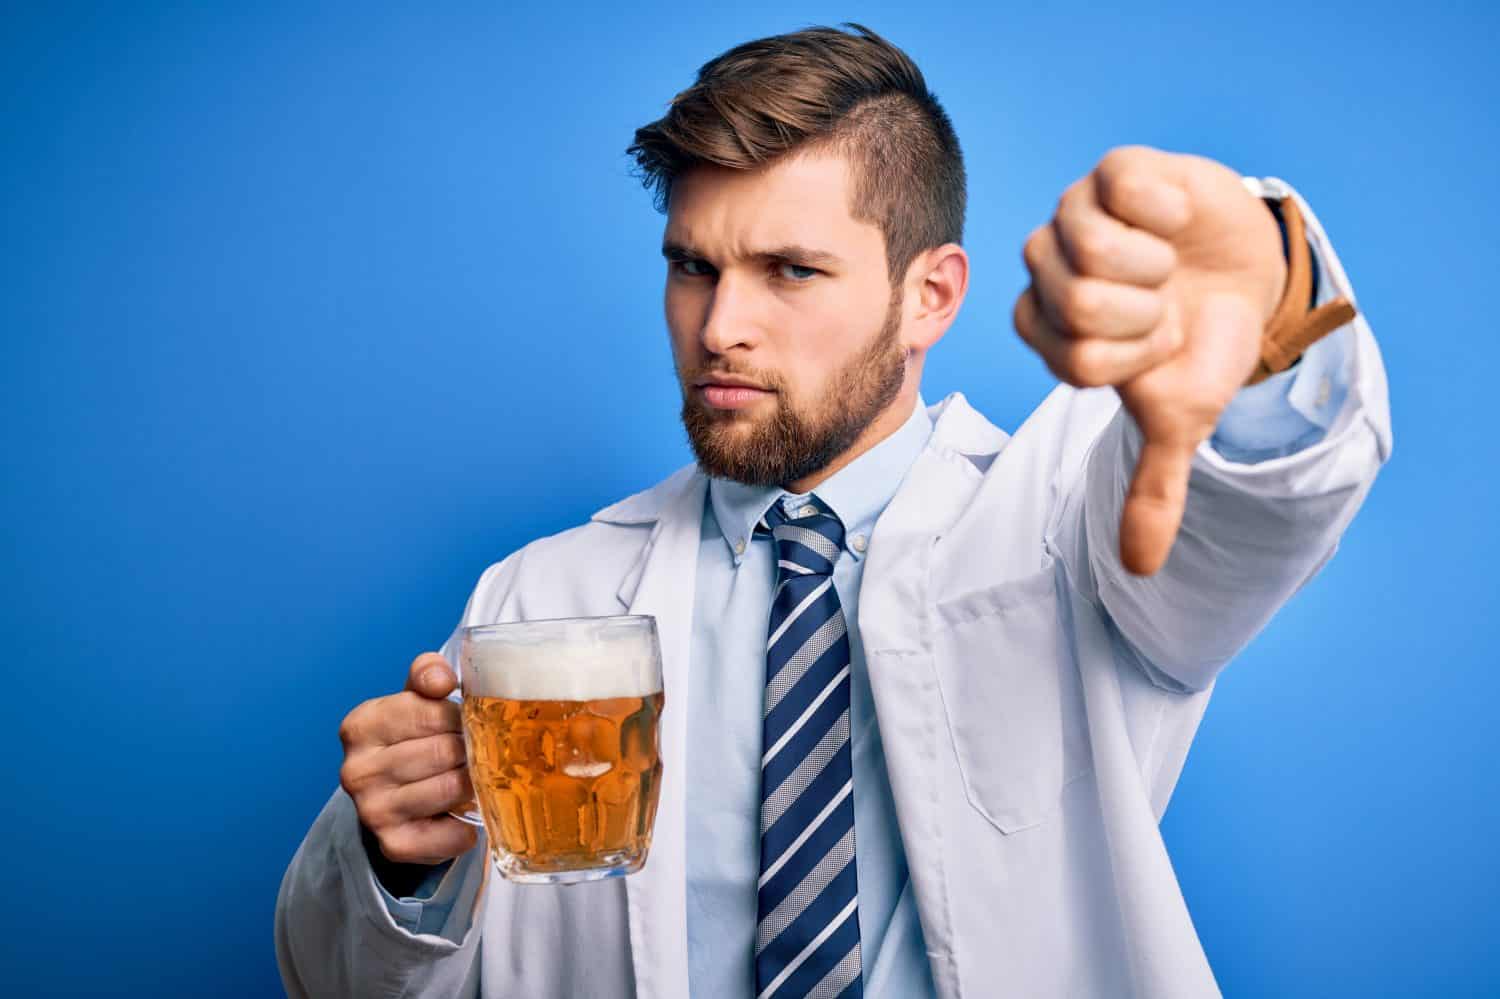 Young blond doctor man with beard and blue eyes wearing coat drinking jar of beer with angry face, negative sign showing dislike with thumbs down, rejection concept